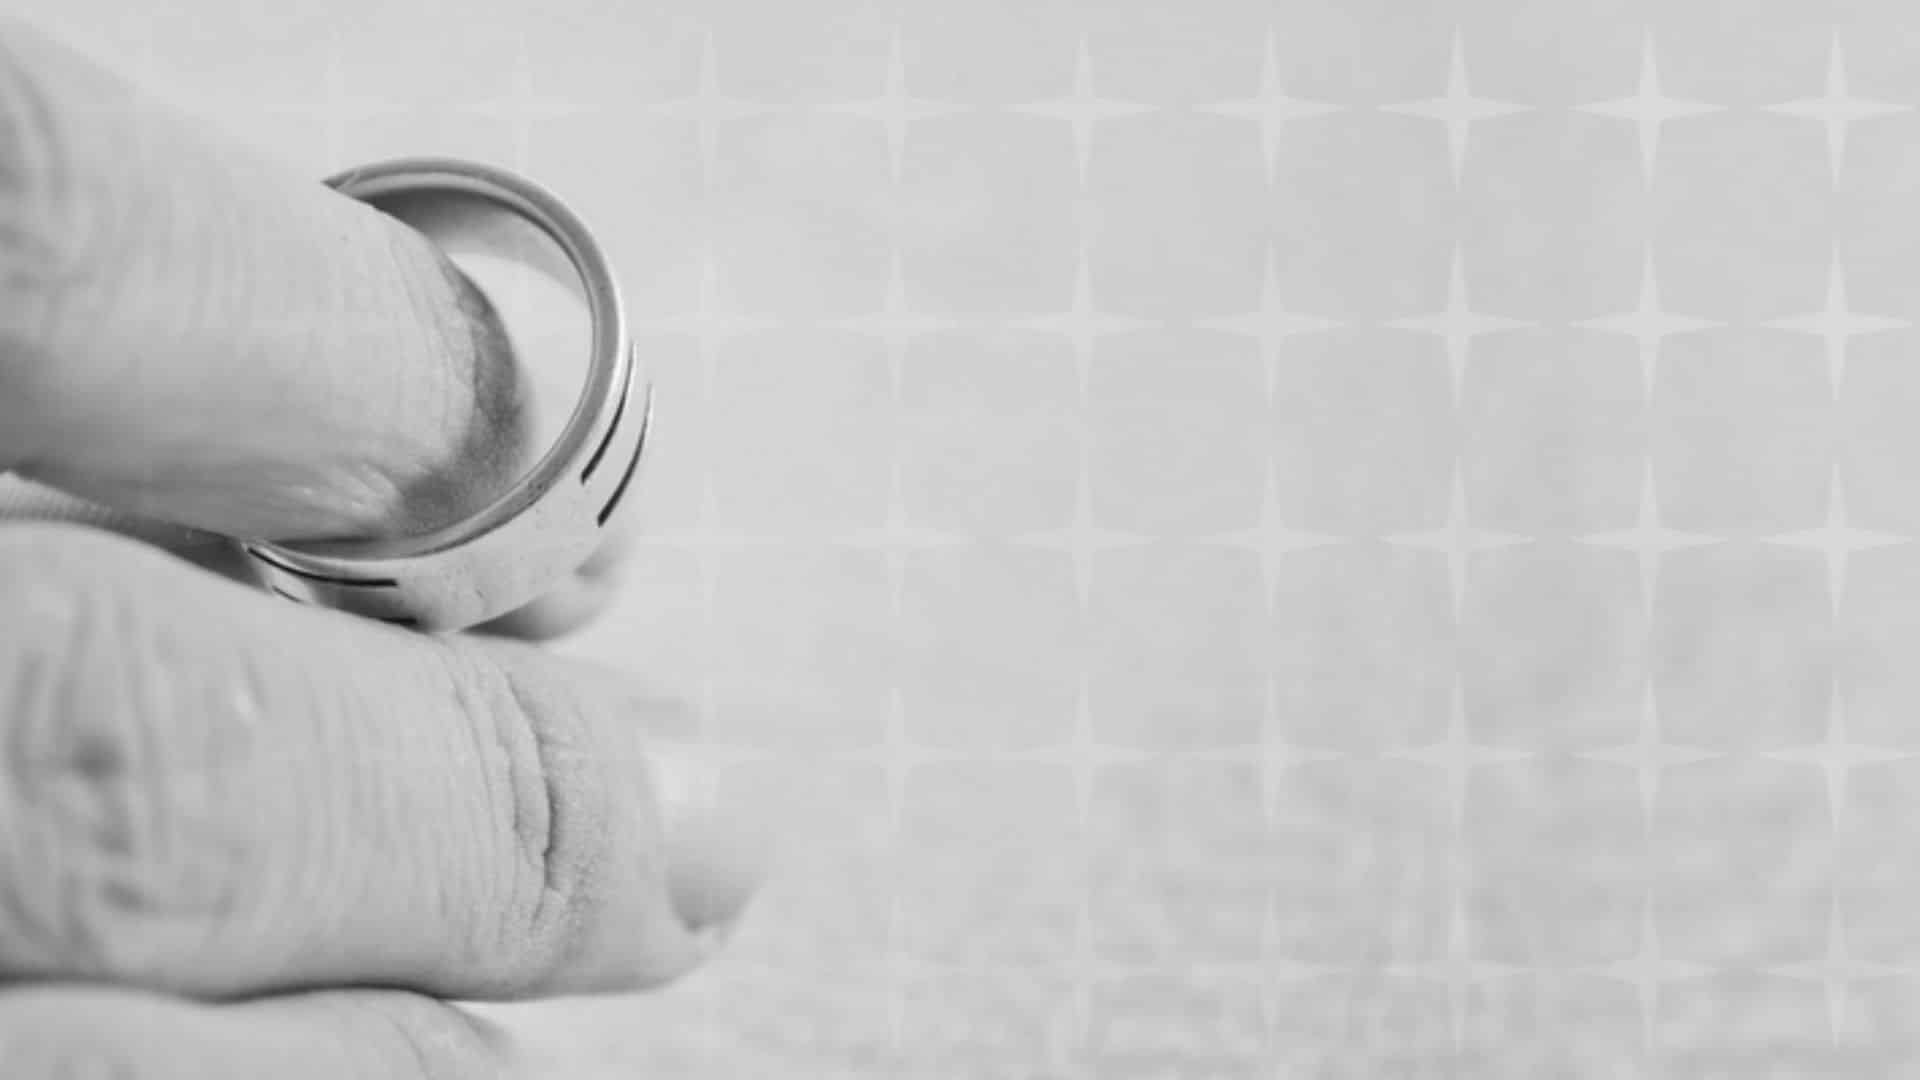 black and white photo of a wedding ring being held between two fingers